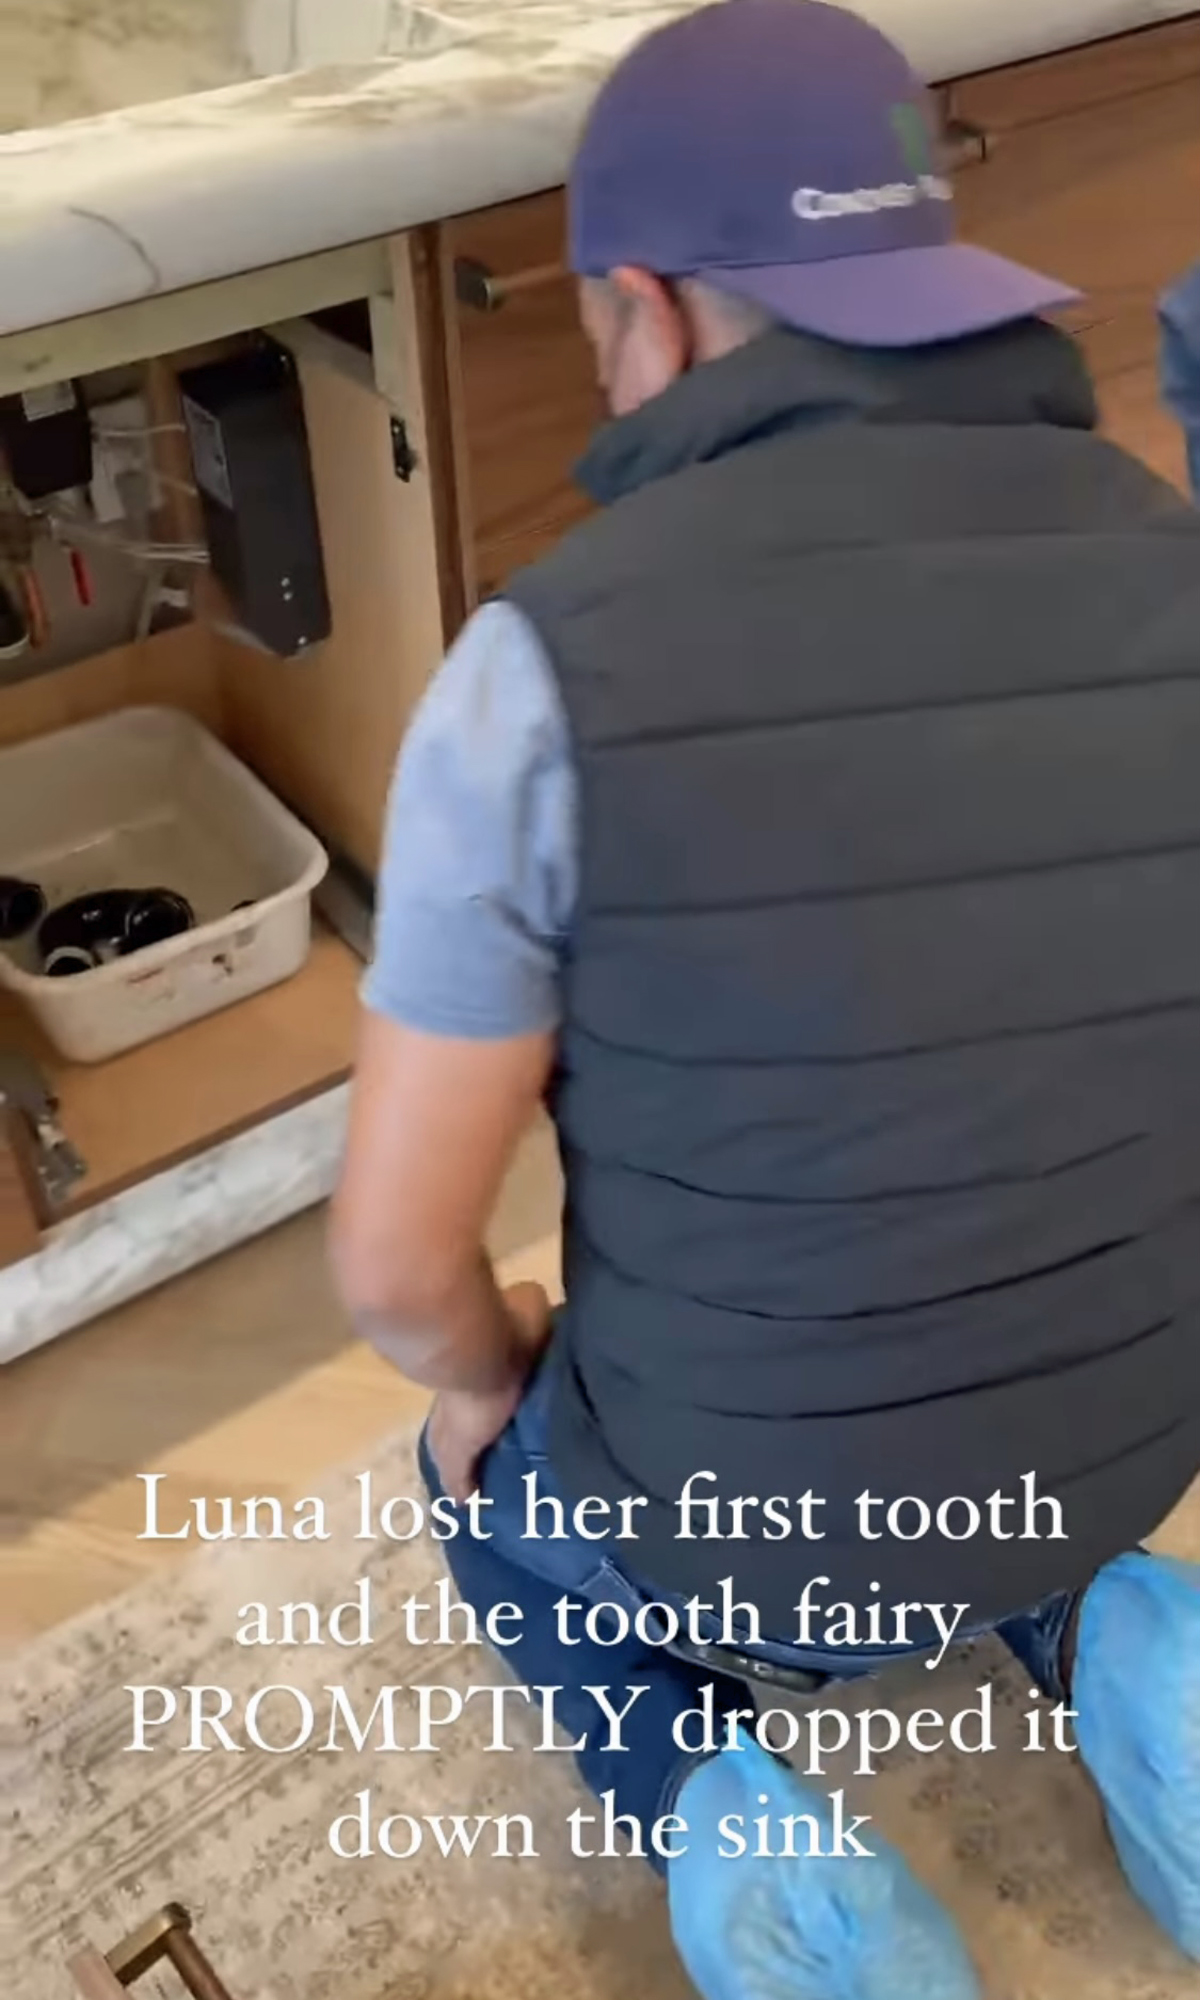 Chrissy Teigen Accidentally Dropped Luna's First Tooth Down The Drain -- Then Hired A PLUMBER To Rescue It!